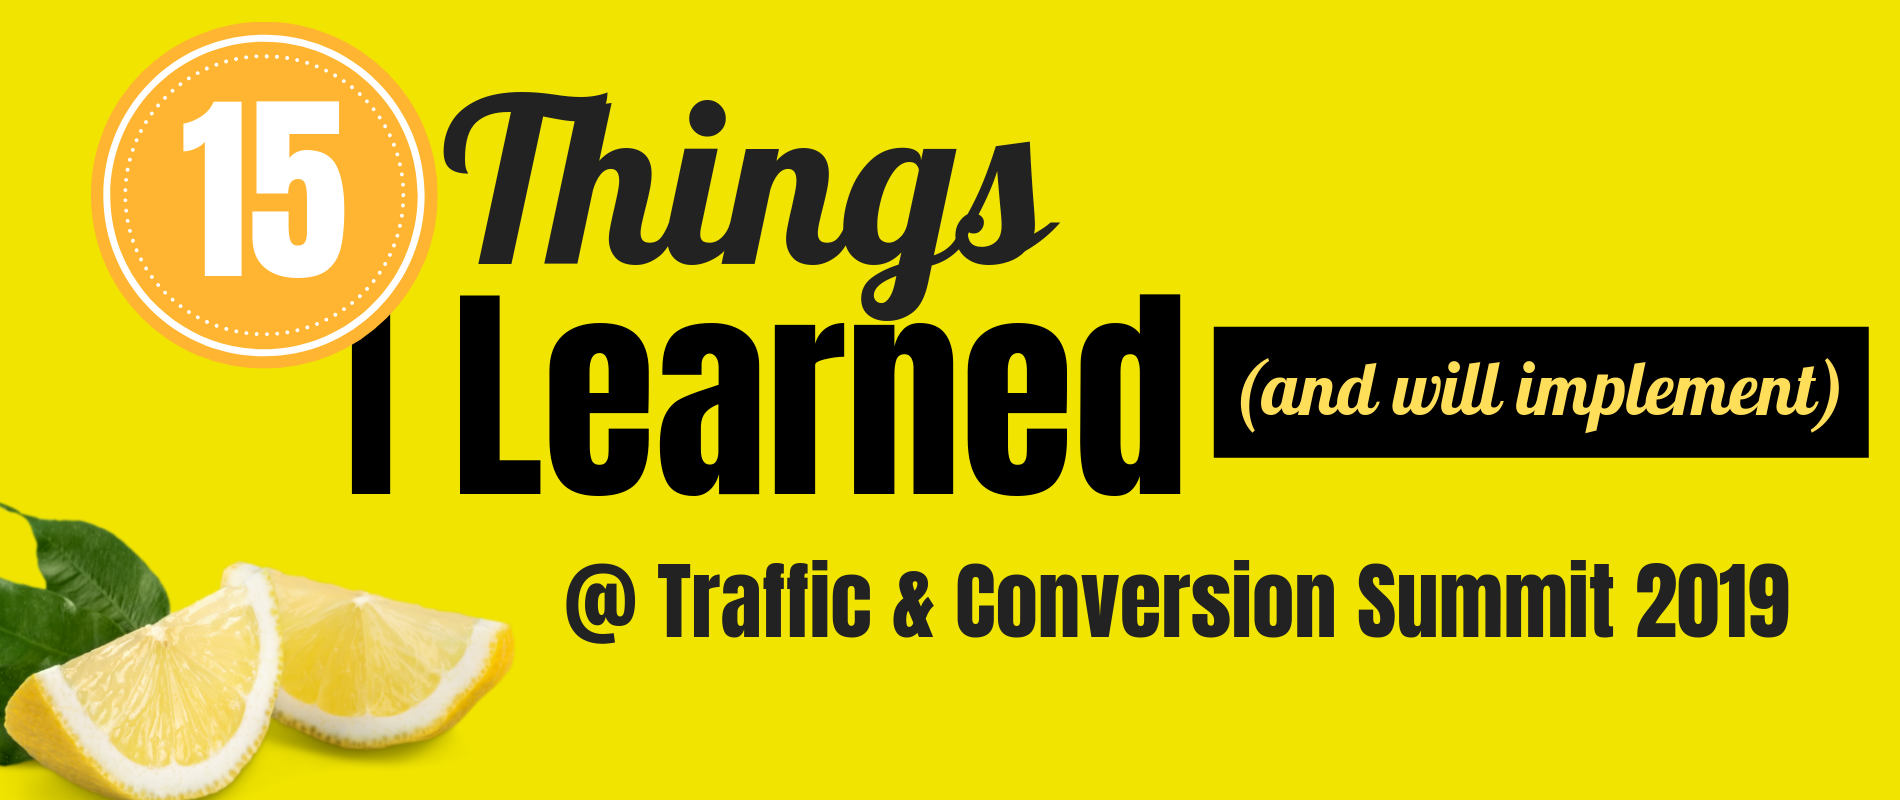 15 Things I Learned (& will implement) At Traffic & Conversion Summit 2019